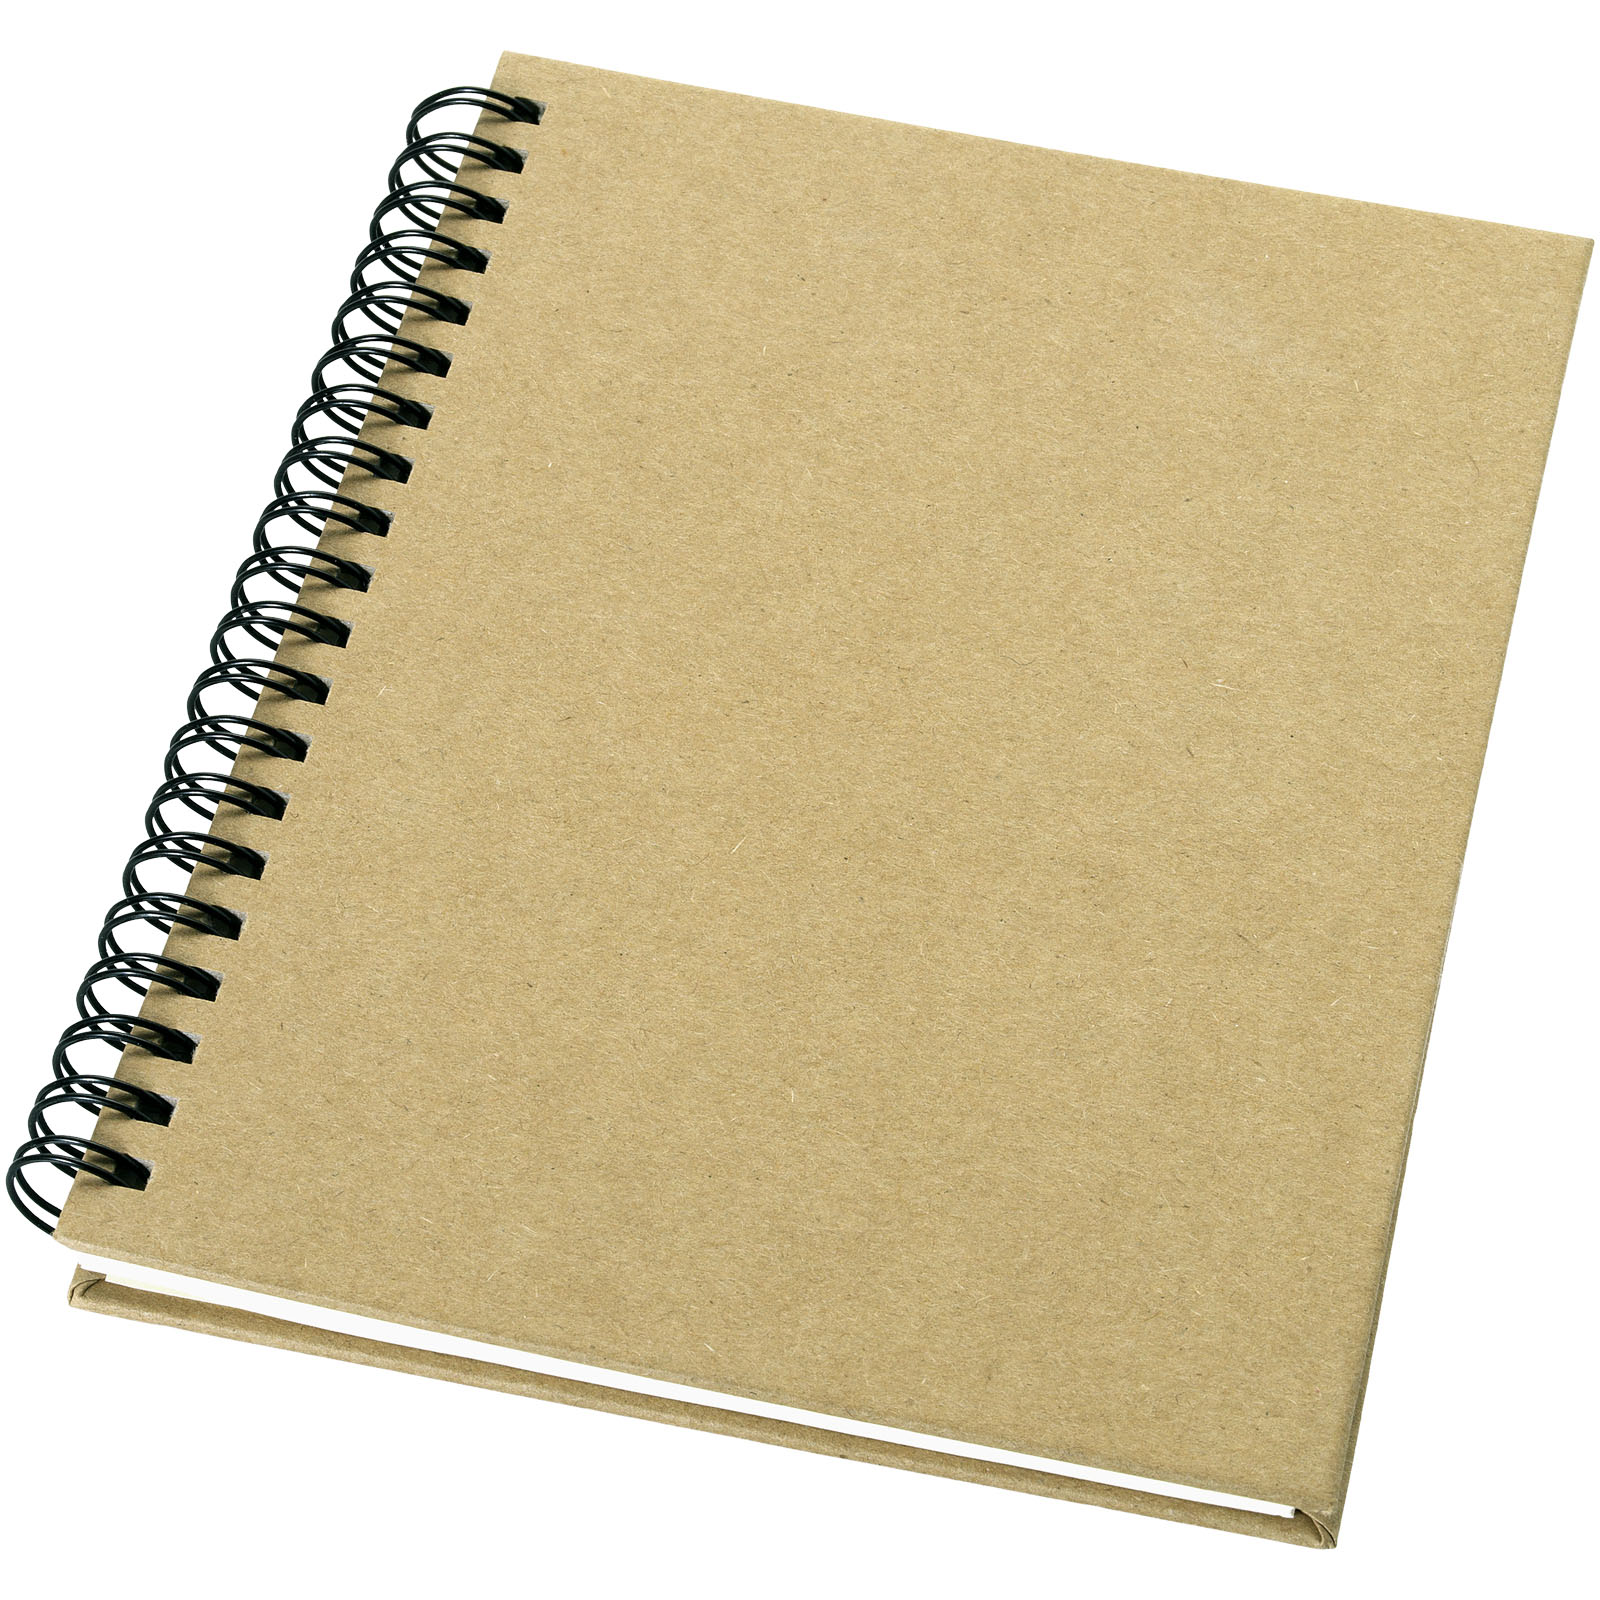 Advertising Hard cover notebooks - Mendel recycled notebook